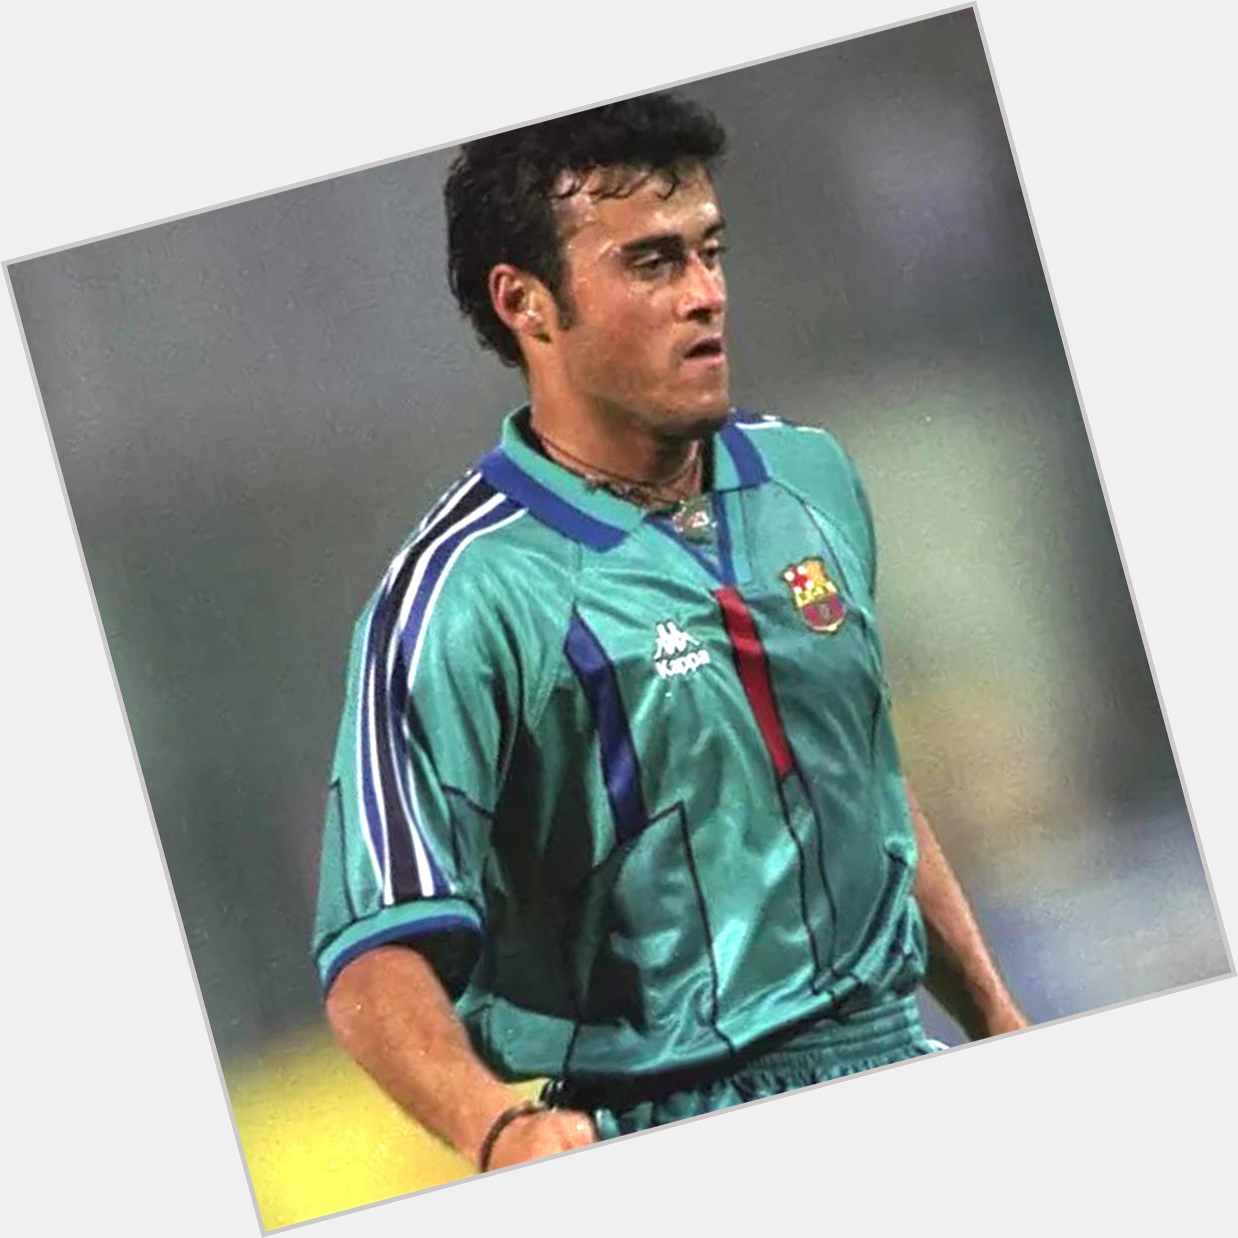 Happy Birthday Luis Enrique   Here he is wearing that stunning 95-97 Barcelona Away shirt 